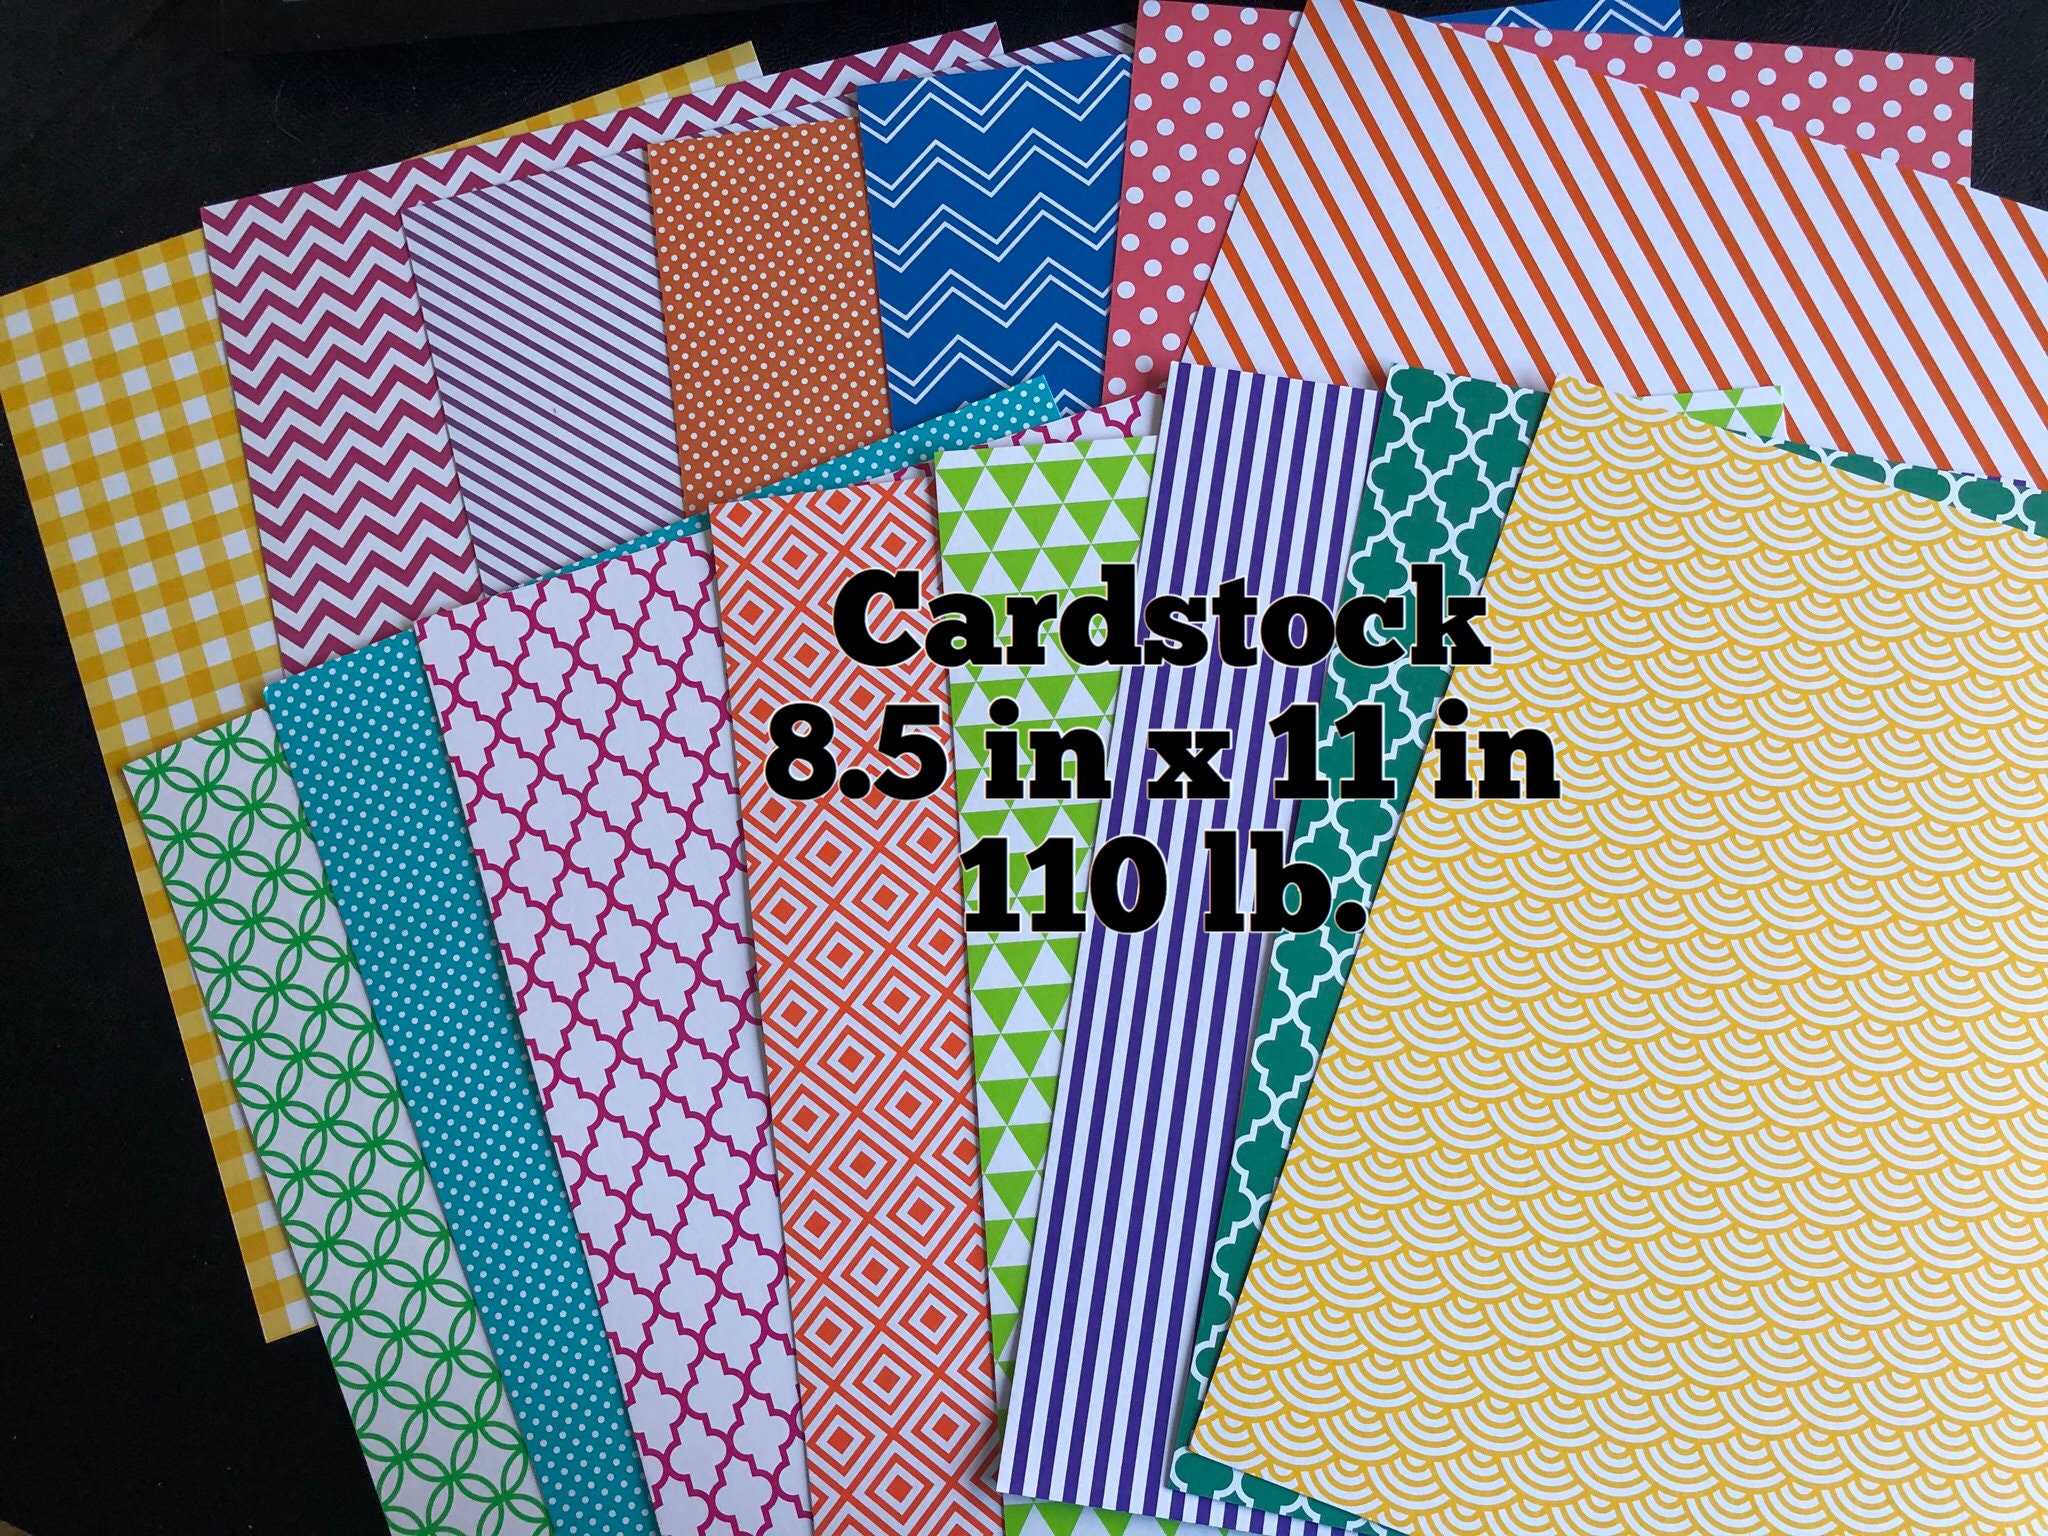 Set of 15 Decorative Thick Cardstock, Size 8.5x 11, 110 Lb., Many